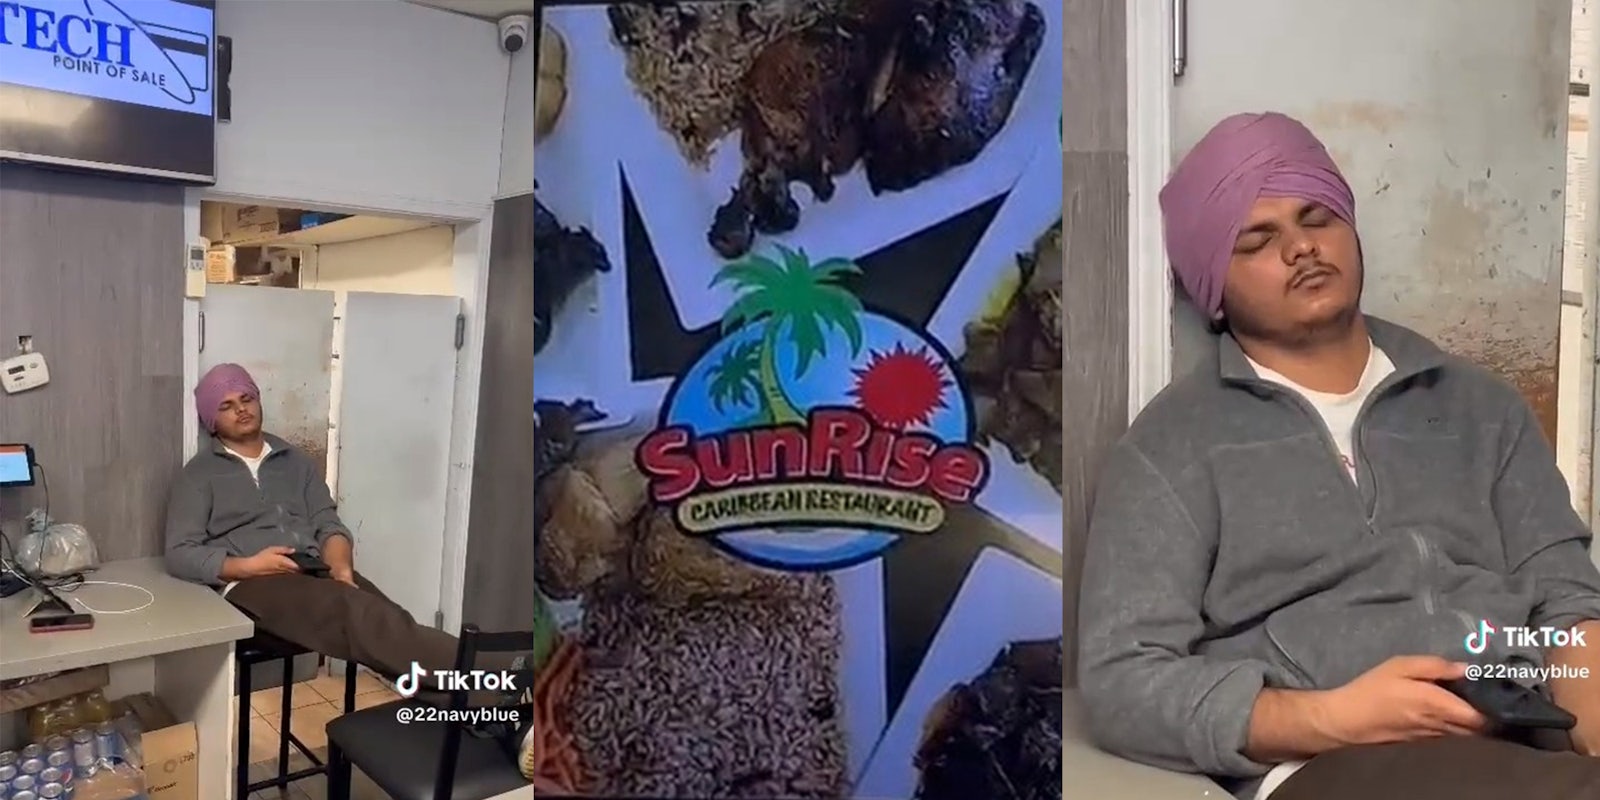 Viewers Defend - Customer catches Sunrise Caribbean Restaurant worker sleeping while on the clock